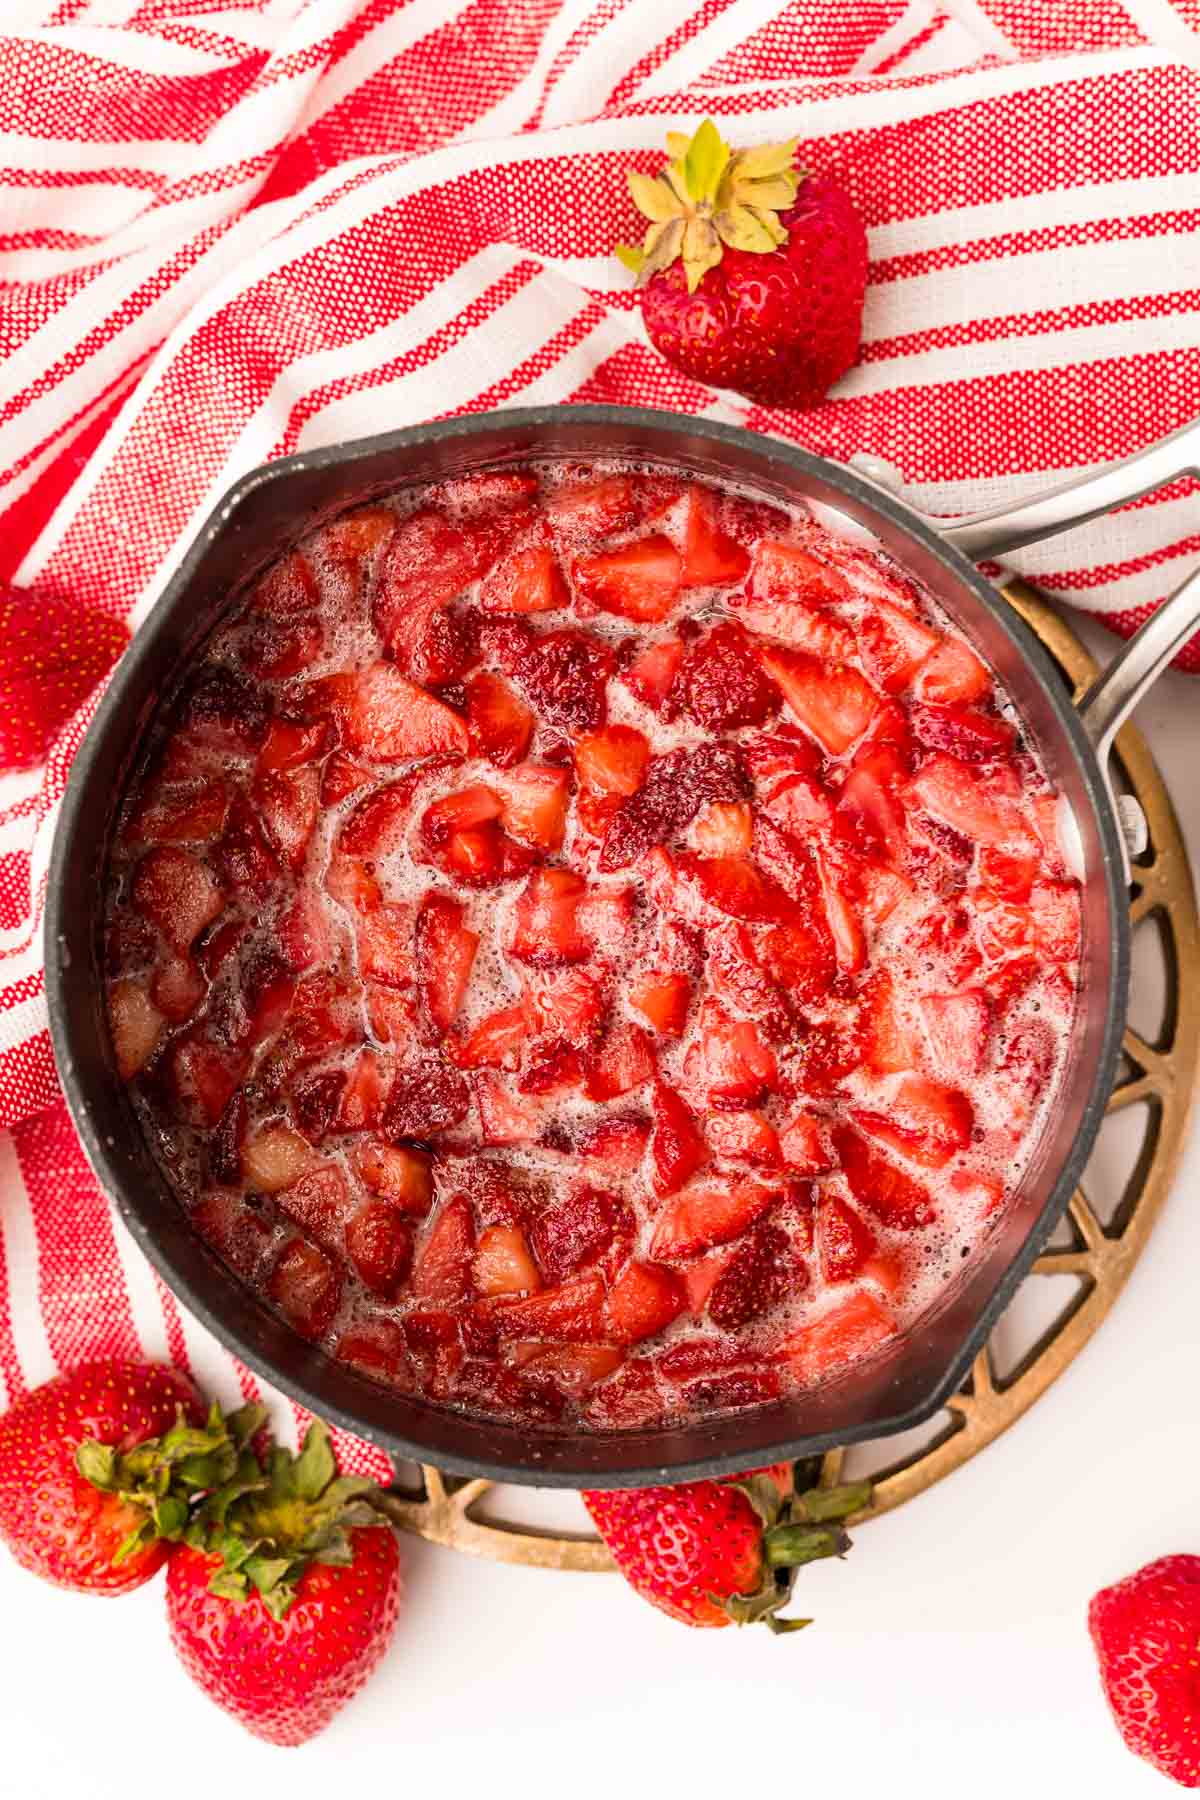 Overhead photo of a saucepan with strawberries in it to make strawberry simple syrup.